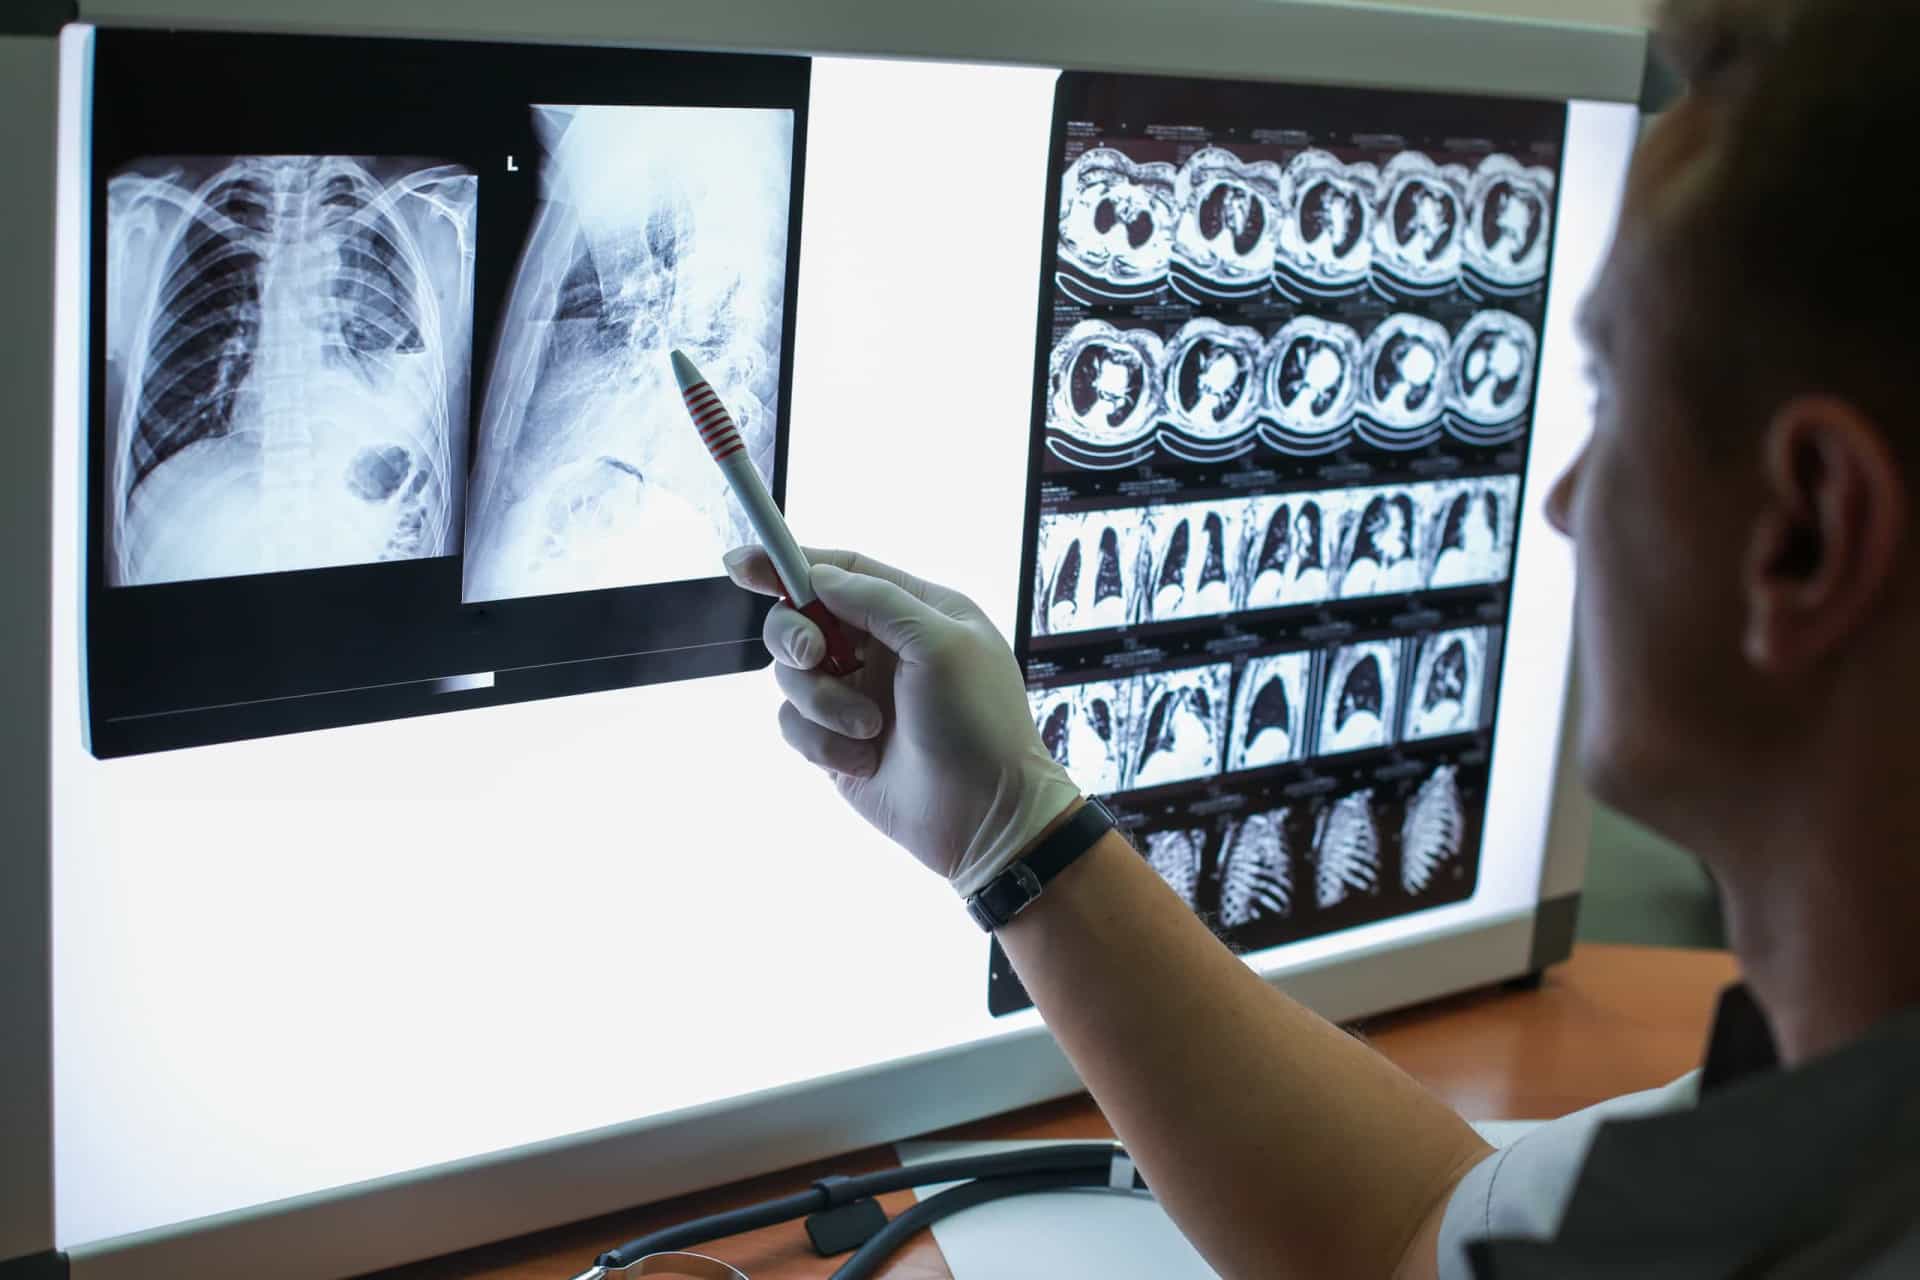 <p>There is a specific type of CT scan that is used to screen for lung cancer. It’s called a low-dose helical computed tomography.</p><p>You may also like:<a href="https://www.starsinsider.com/n/347016?utm_source=msn.com&utm_medium=display&utm_campaign=referral_description&utm_content=516289en-us"> Ridiculous things that only happen in Hollywood movies</a></p>